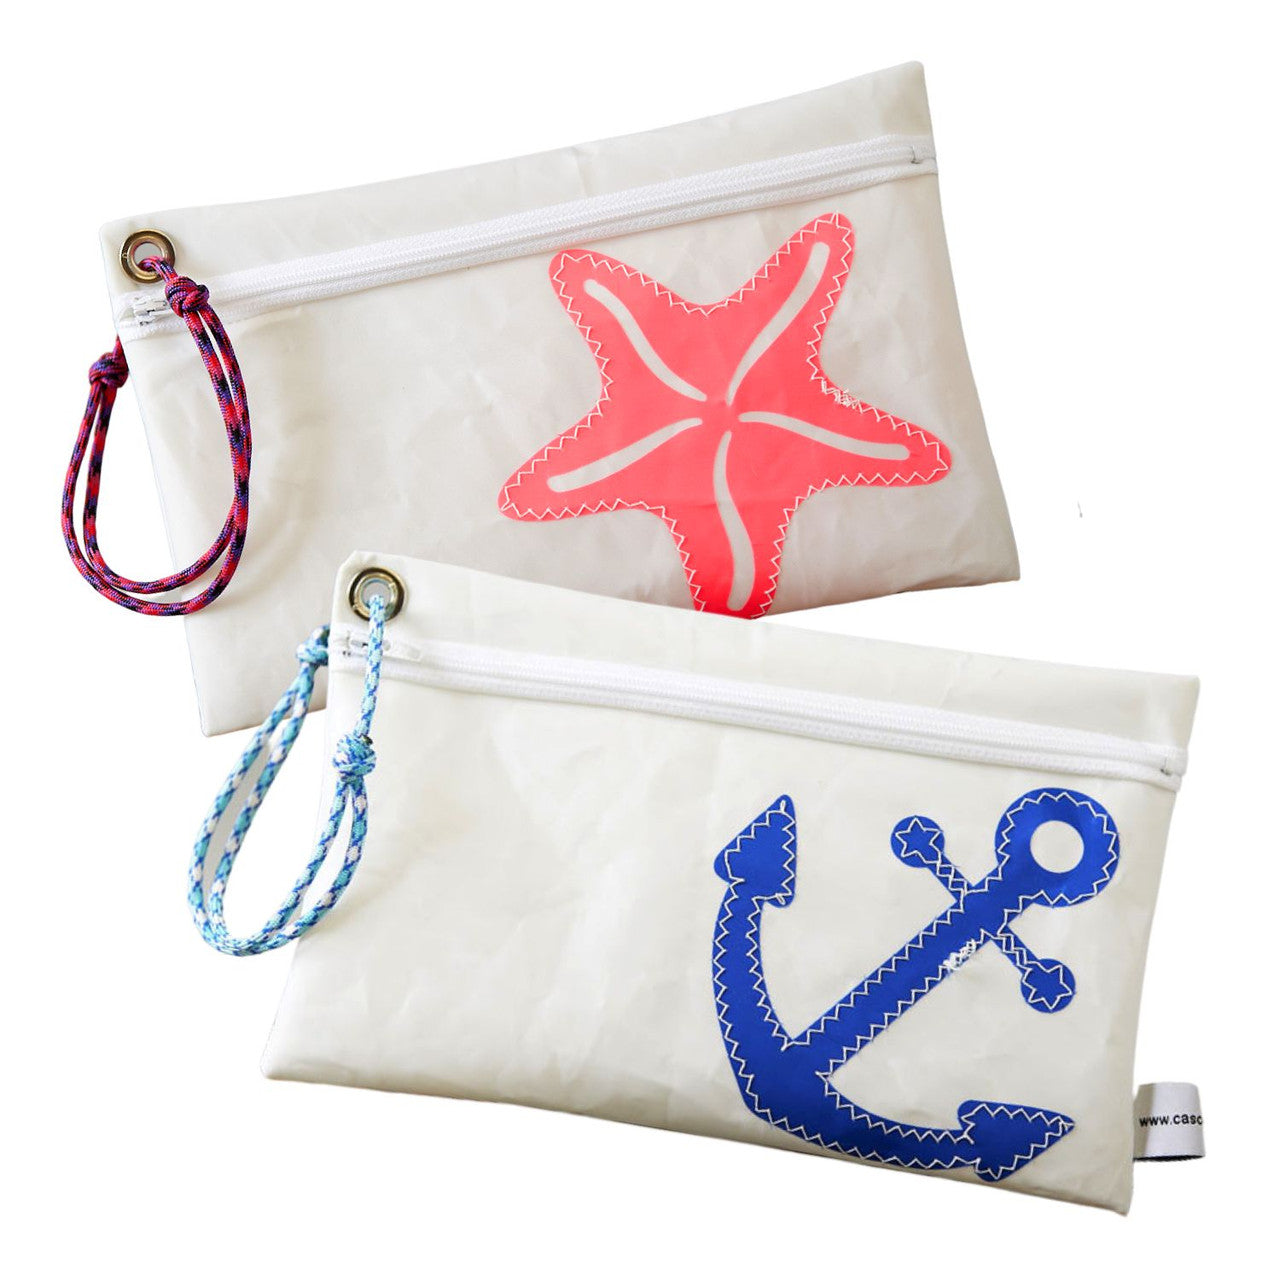 Recycled Sail Wristlet Handbags, Wallets & Cases New England Trading Co   